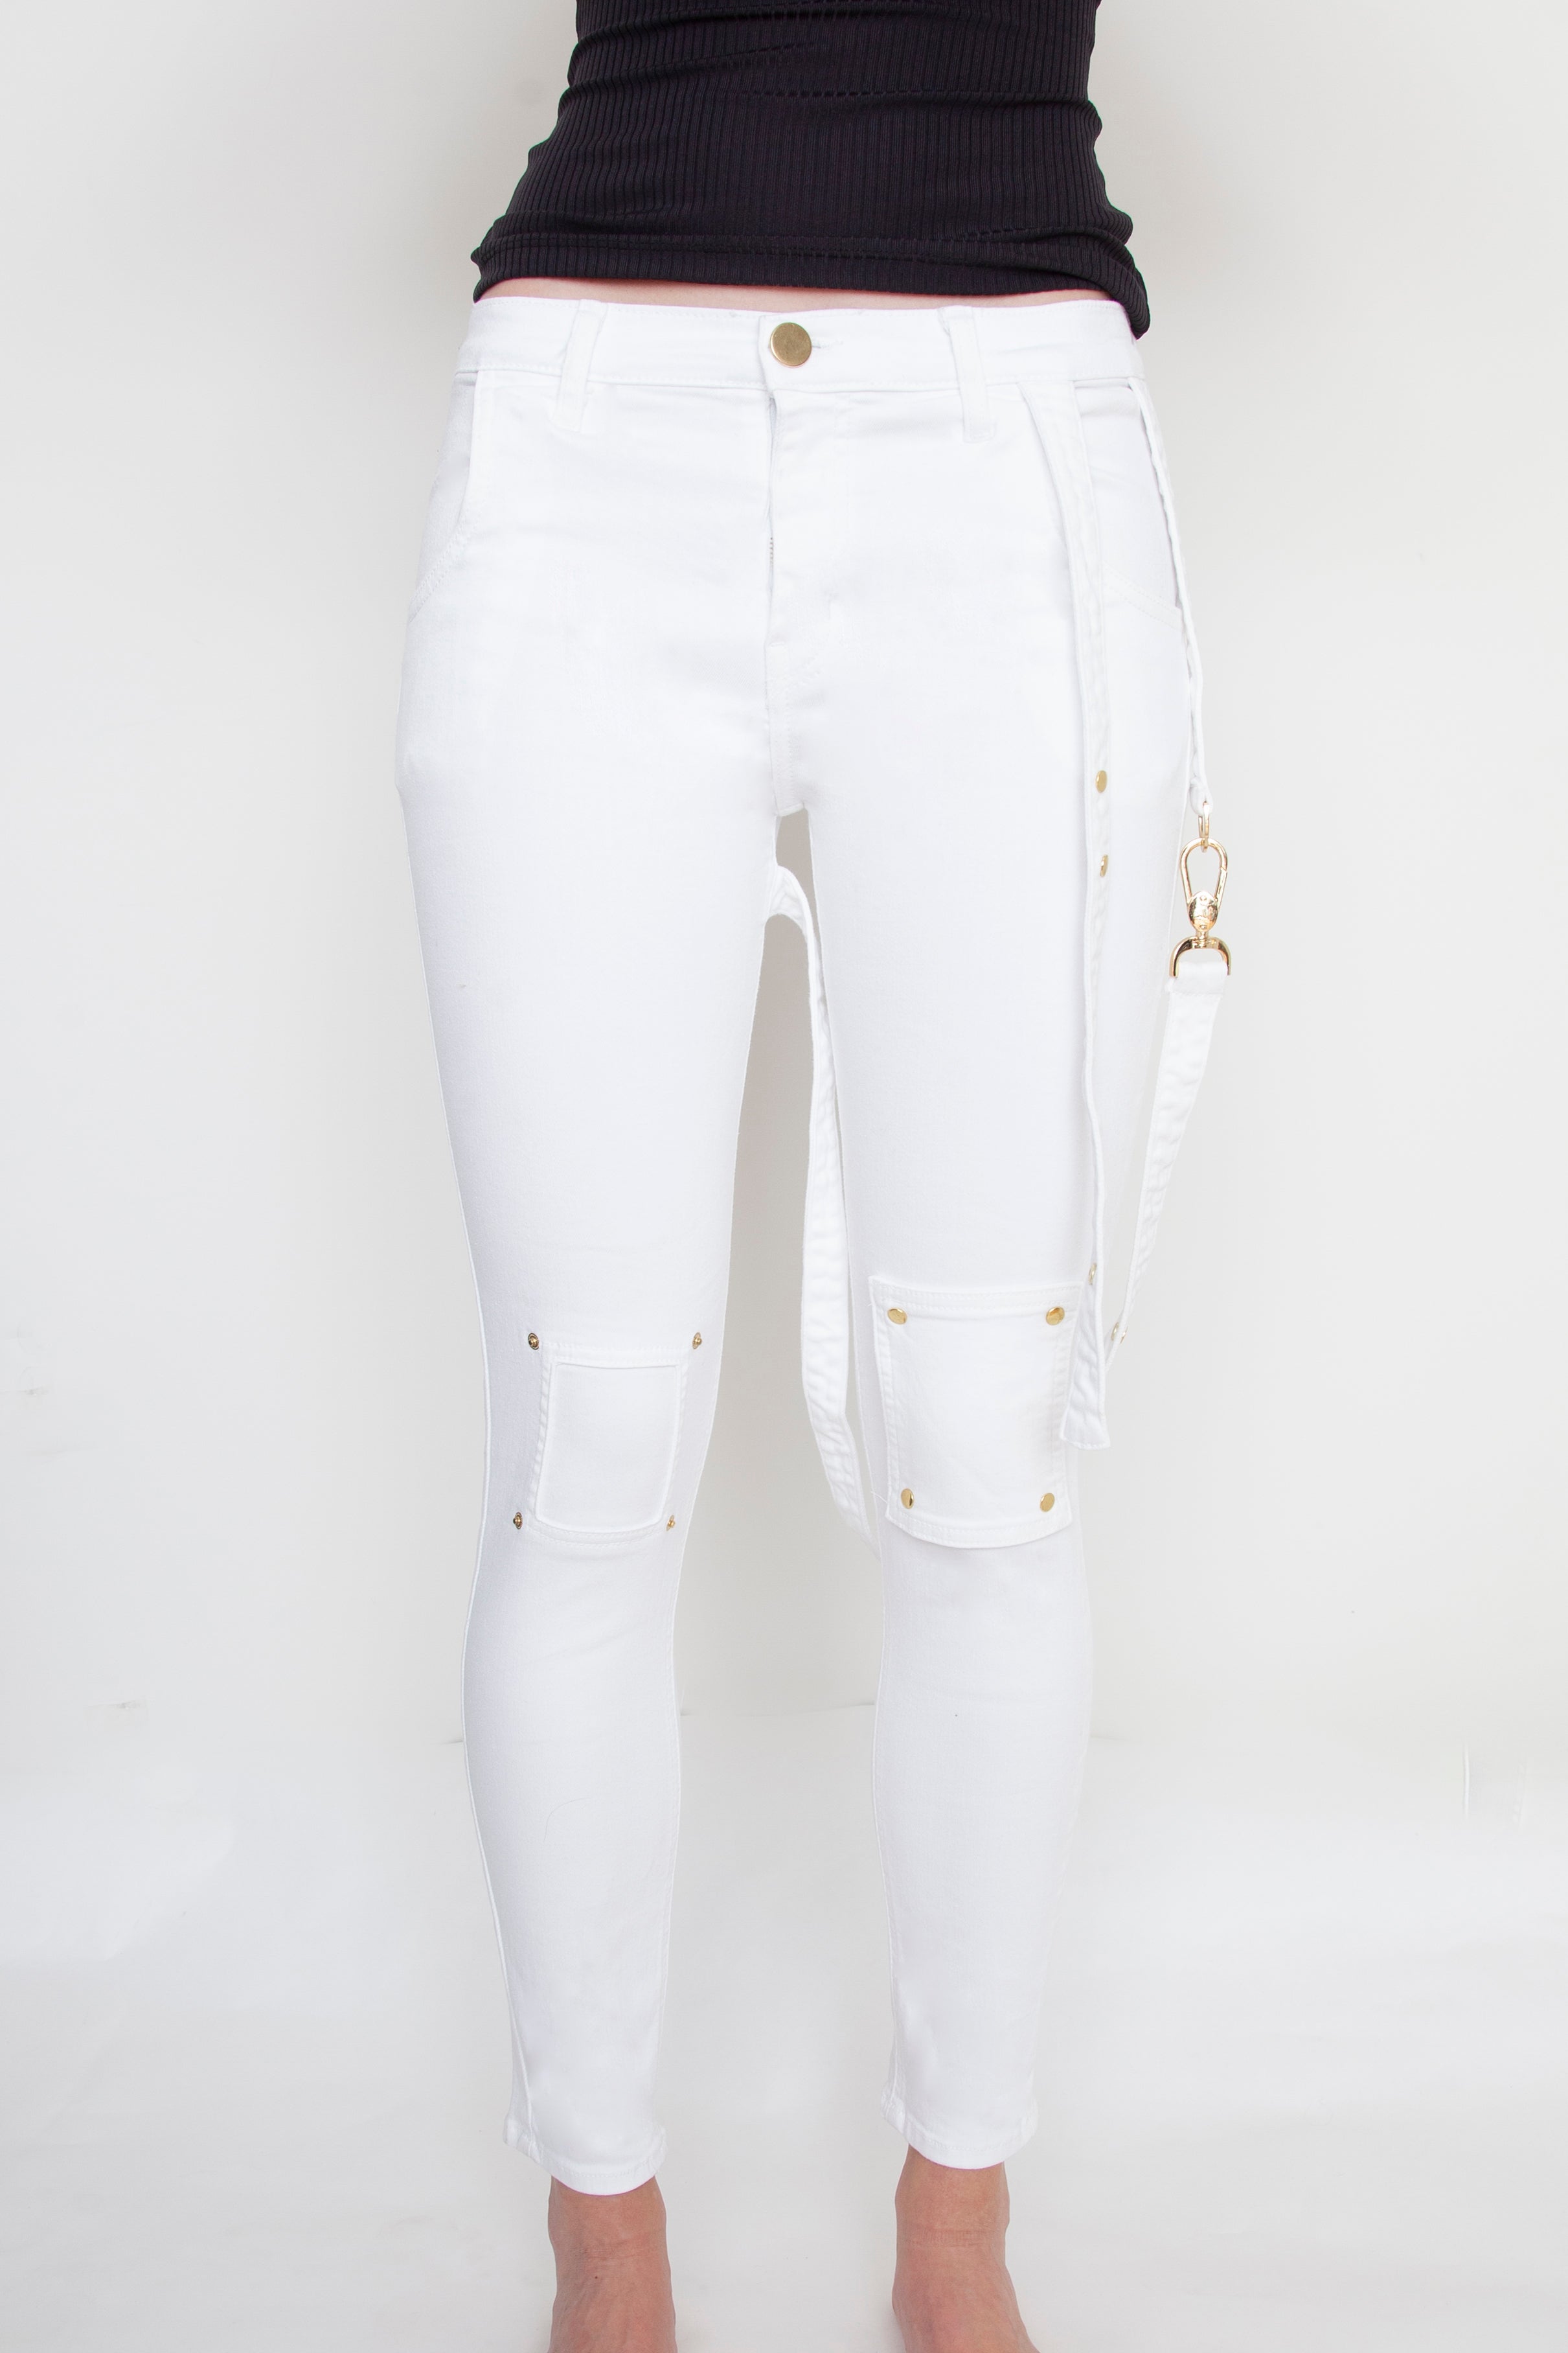 White Strappy Jeans For Charity - Arianne Elmy